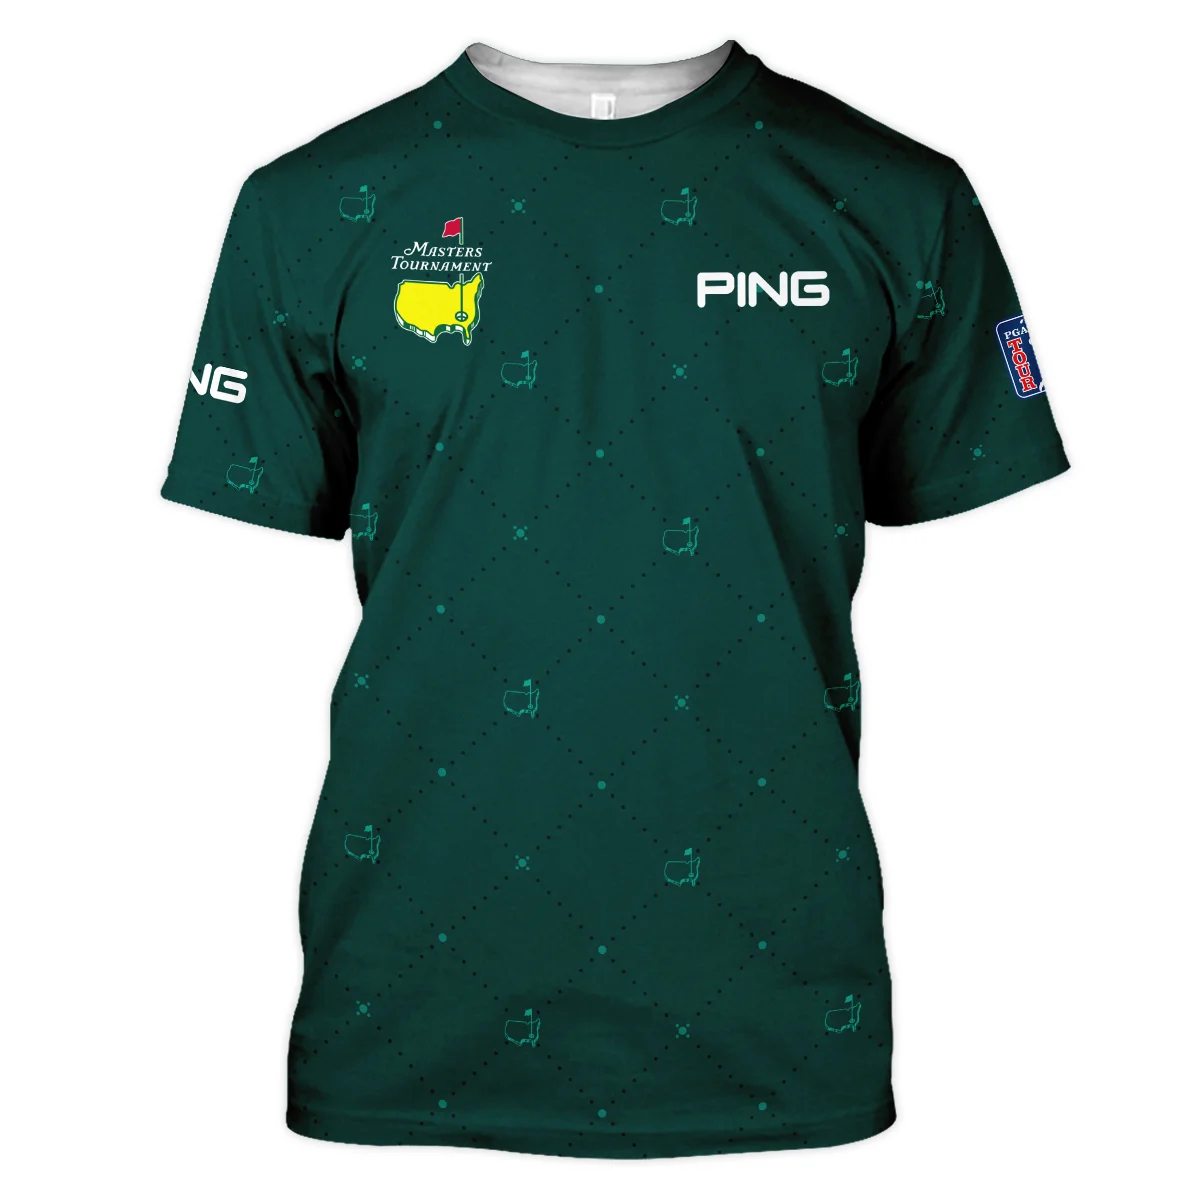 Dark Green Pattern In Retro Style With Logo Masters Tournament Ping Unisex T-Shirt Style Classic T-Shirt